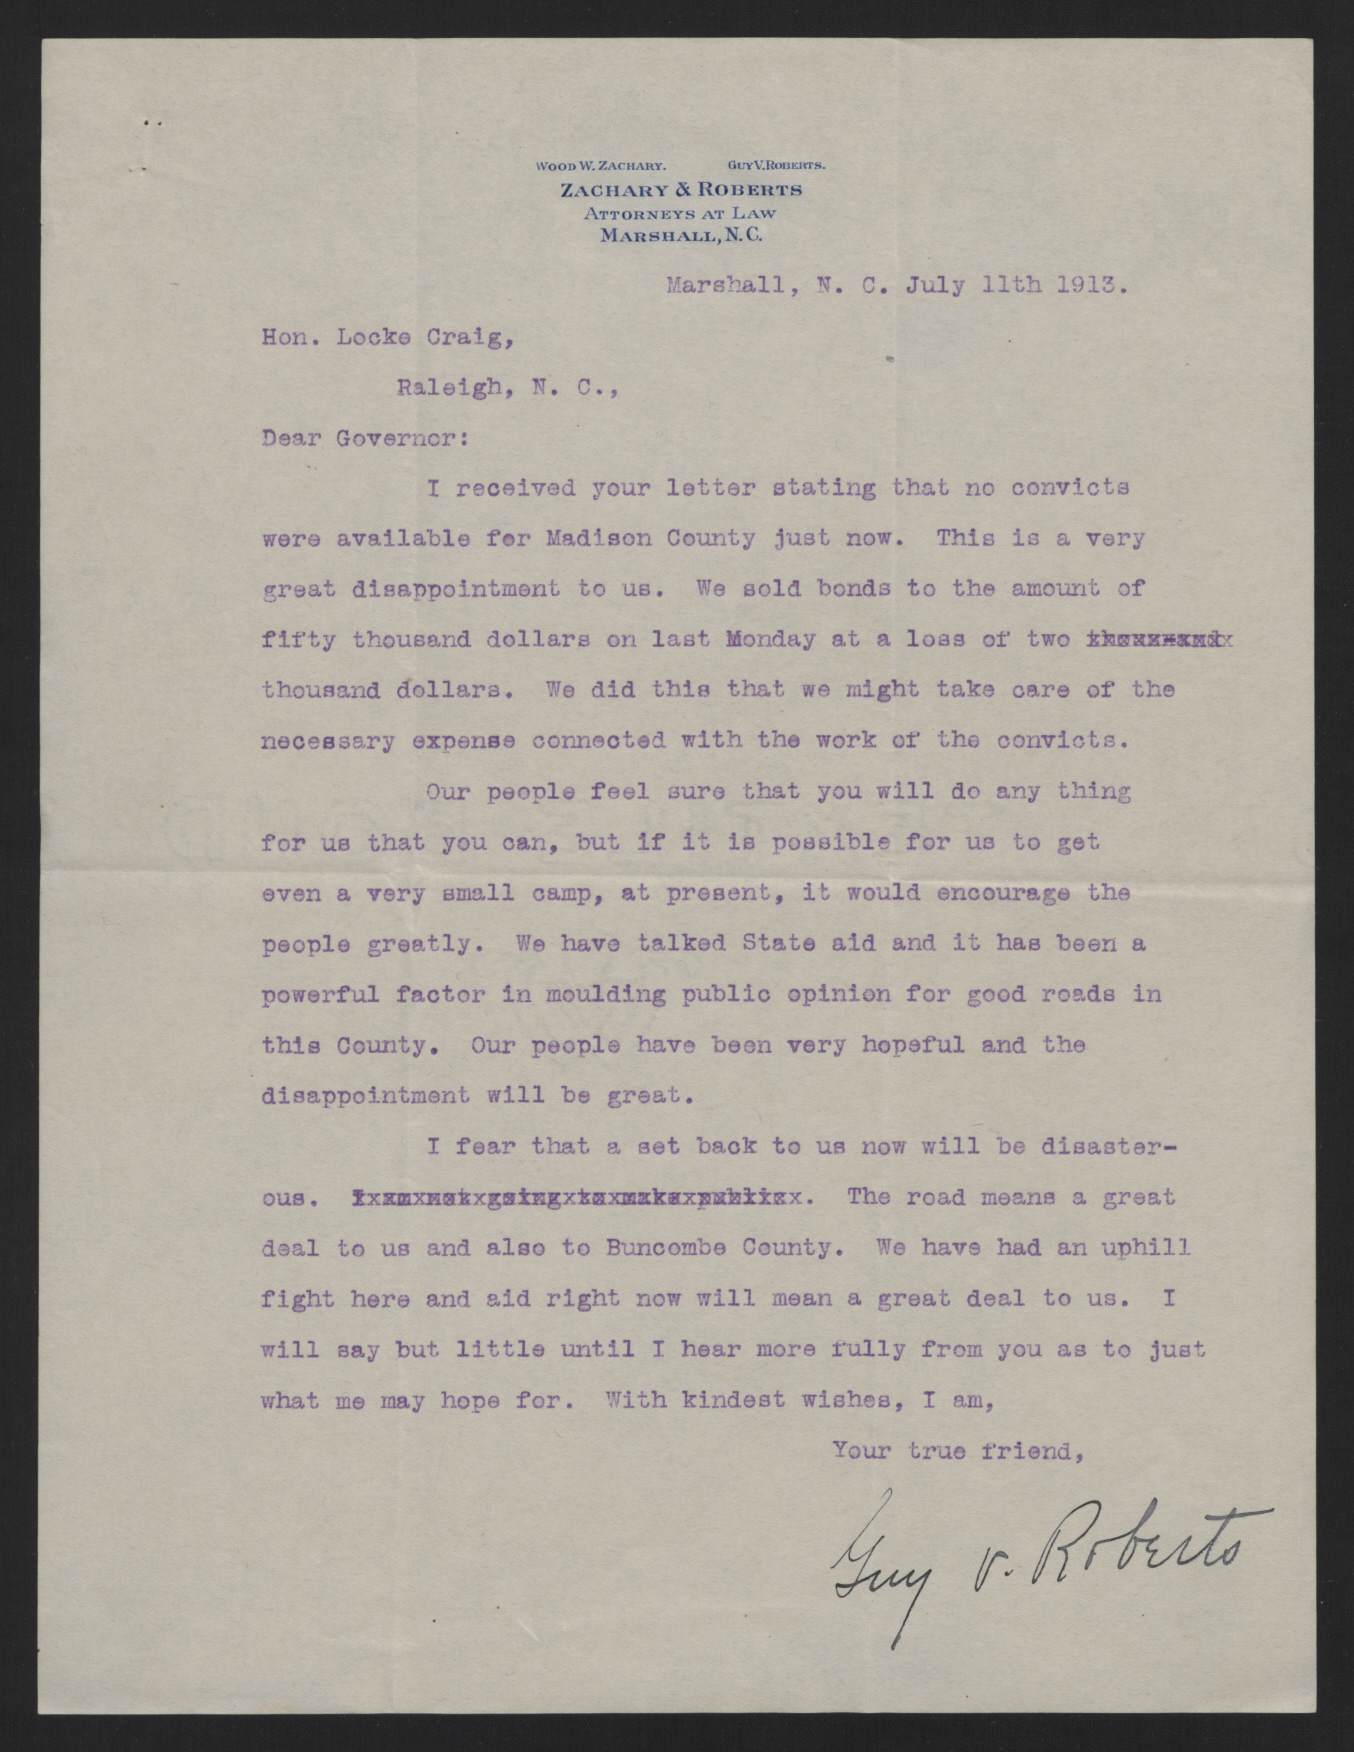 Letter from Roberts to Craig, July 11, 1913